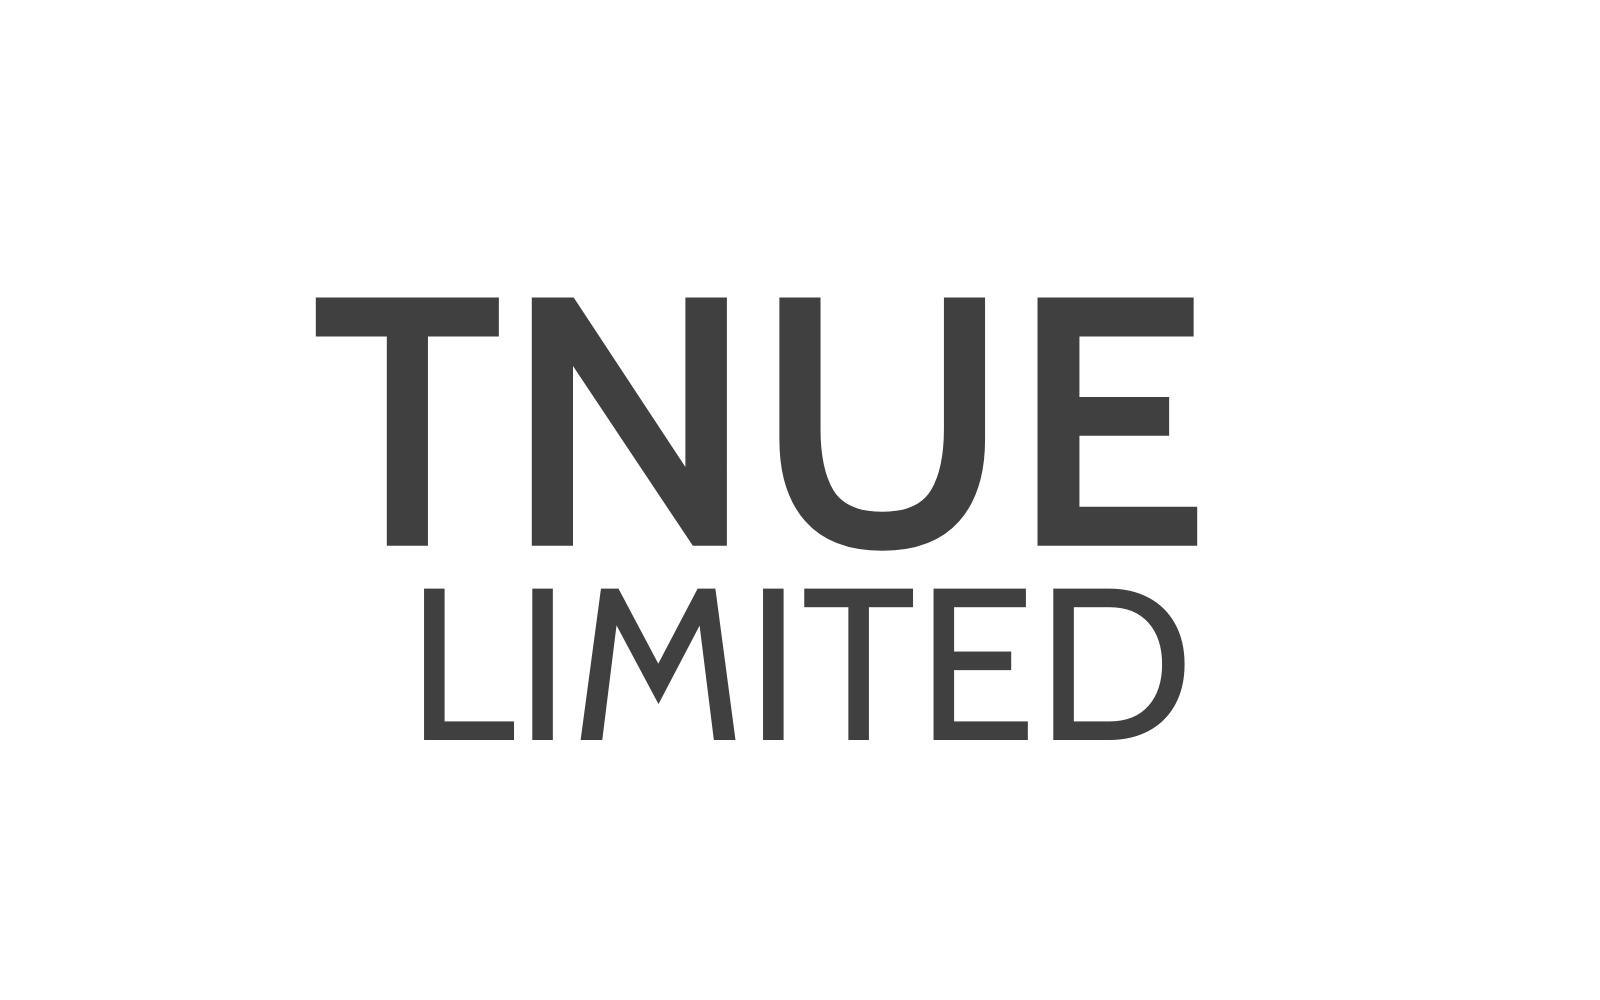 TNUE LIMITED 1600 1000 px